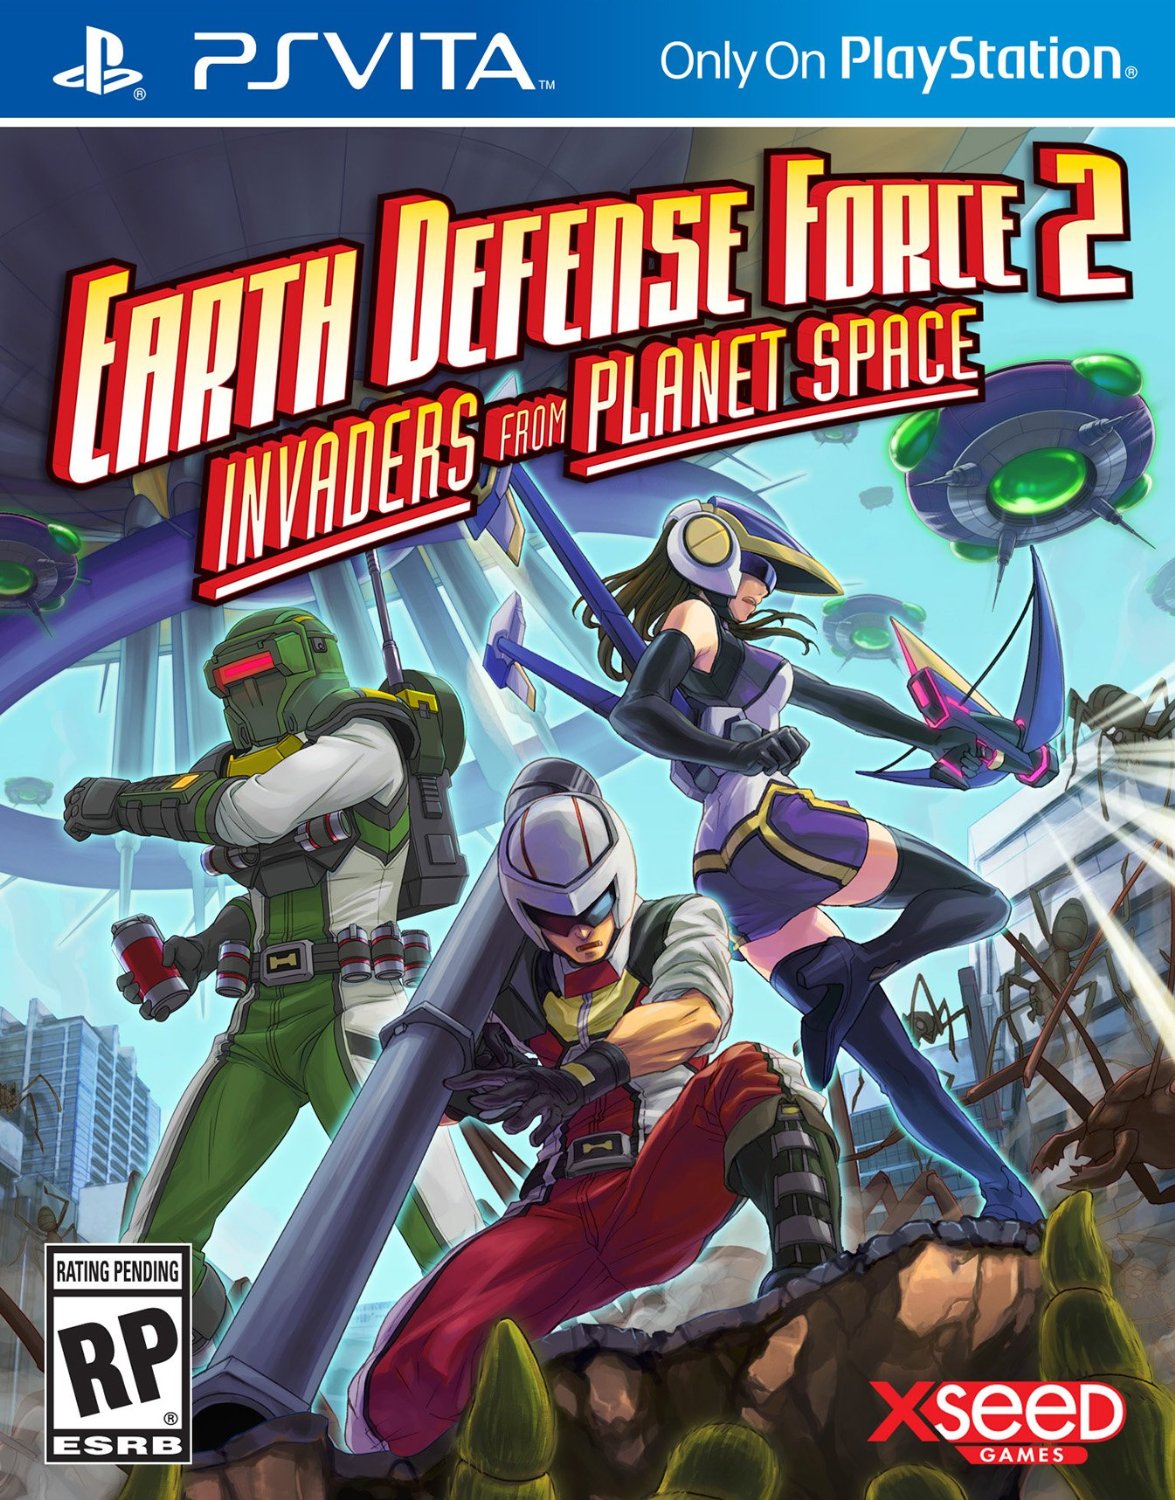 Bote de Earth Defense Force 2 : Invaders from Planet Space